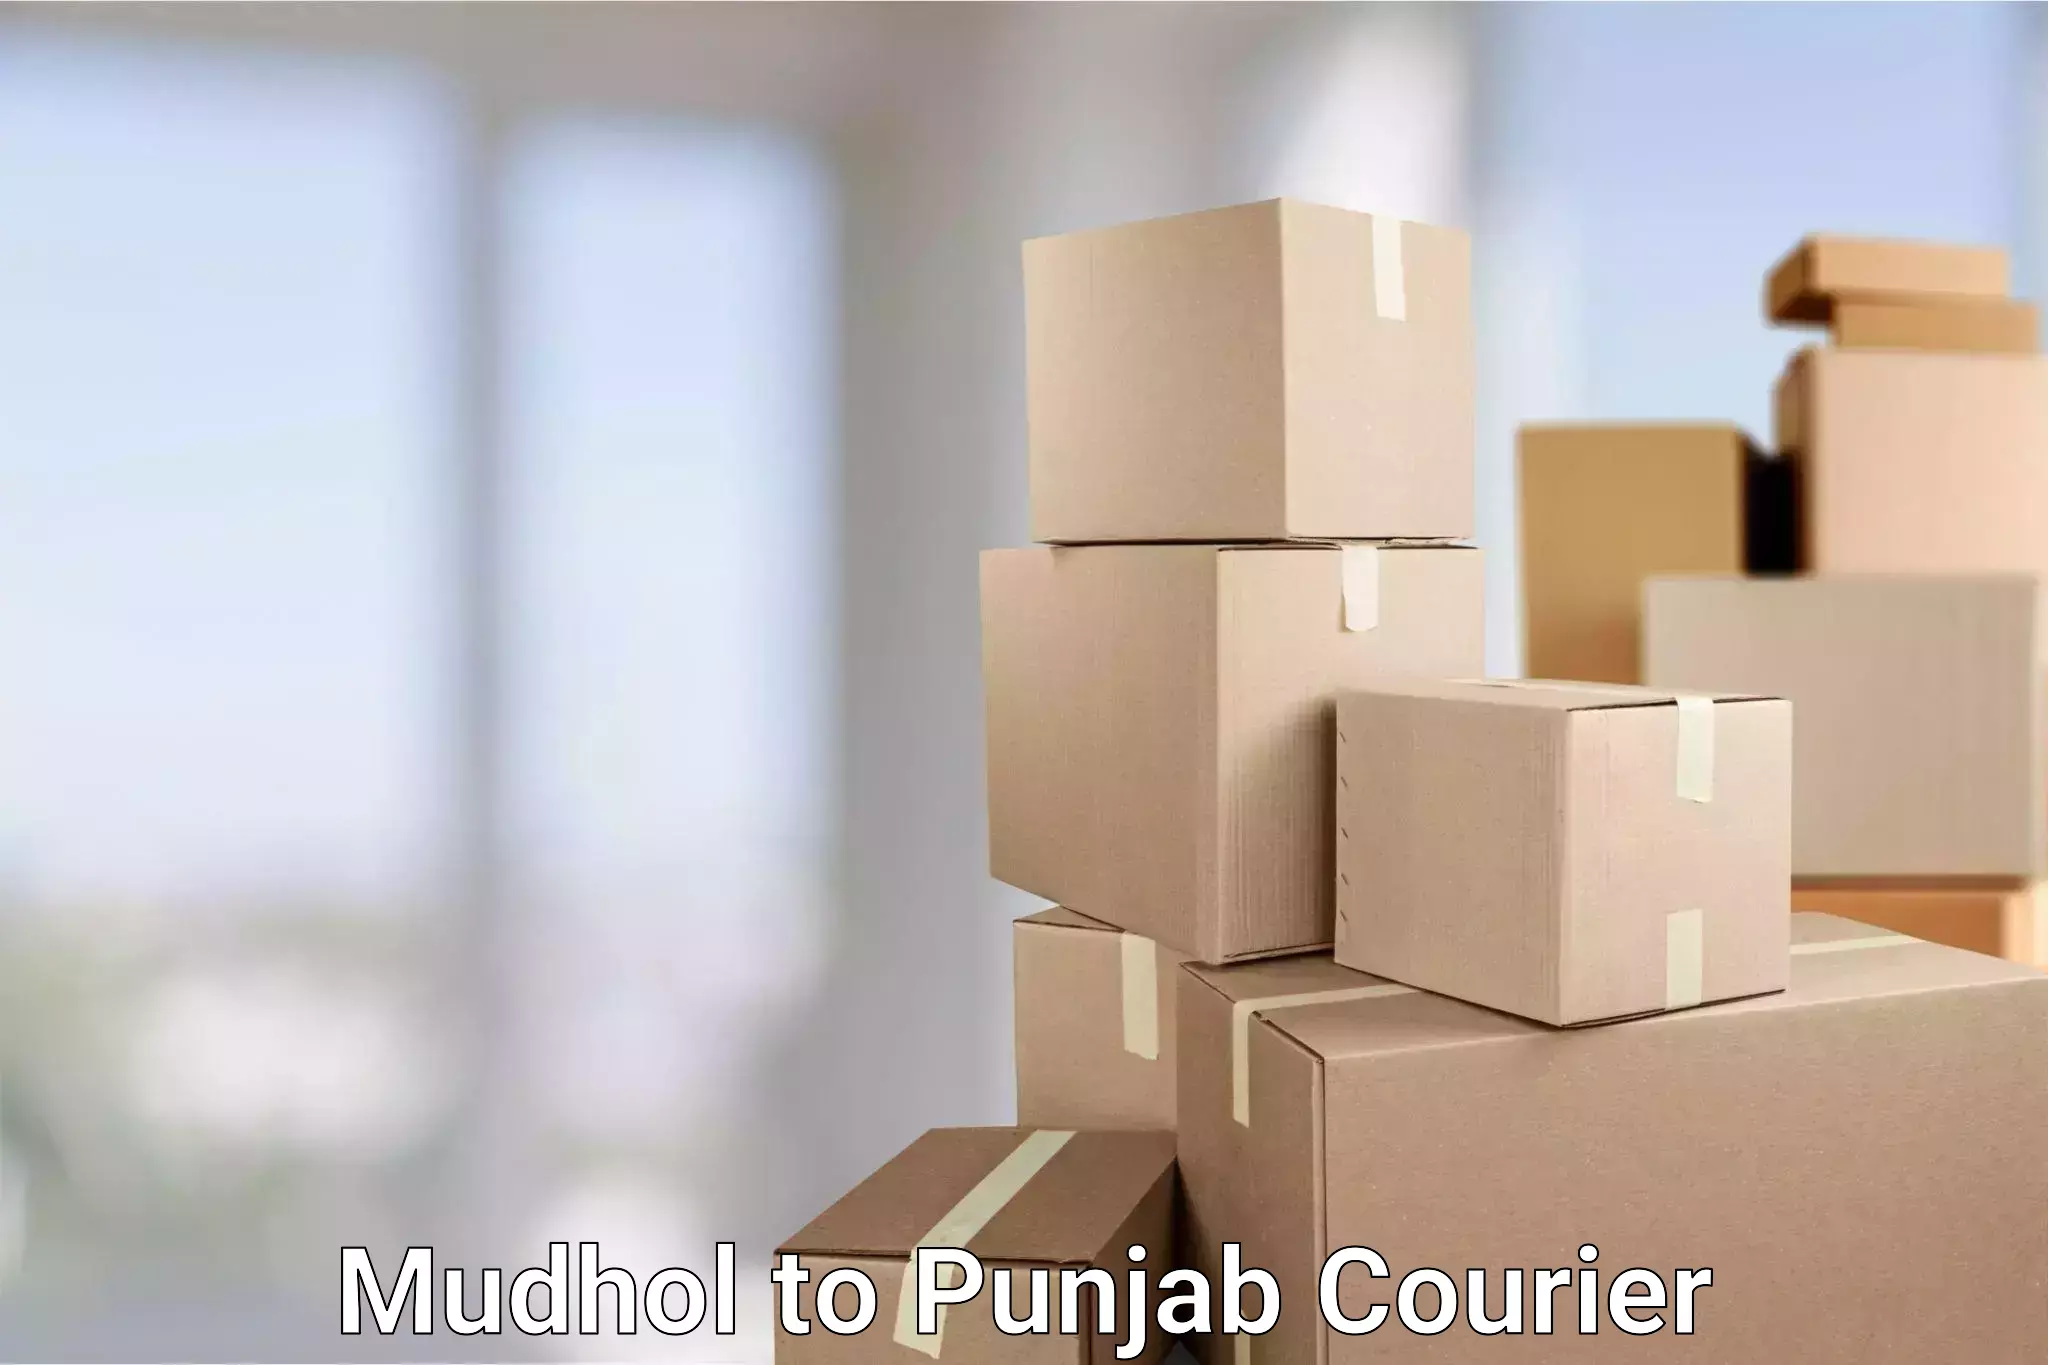 State-of-the-art courier technology Mudhol to Batala